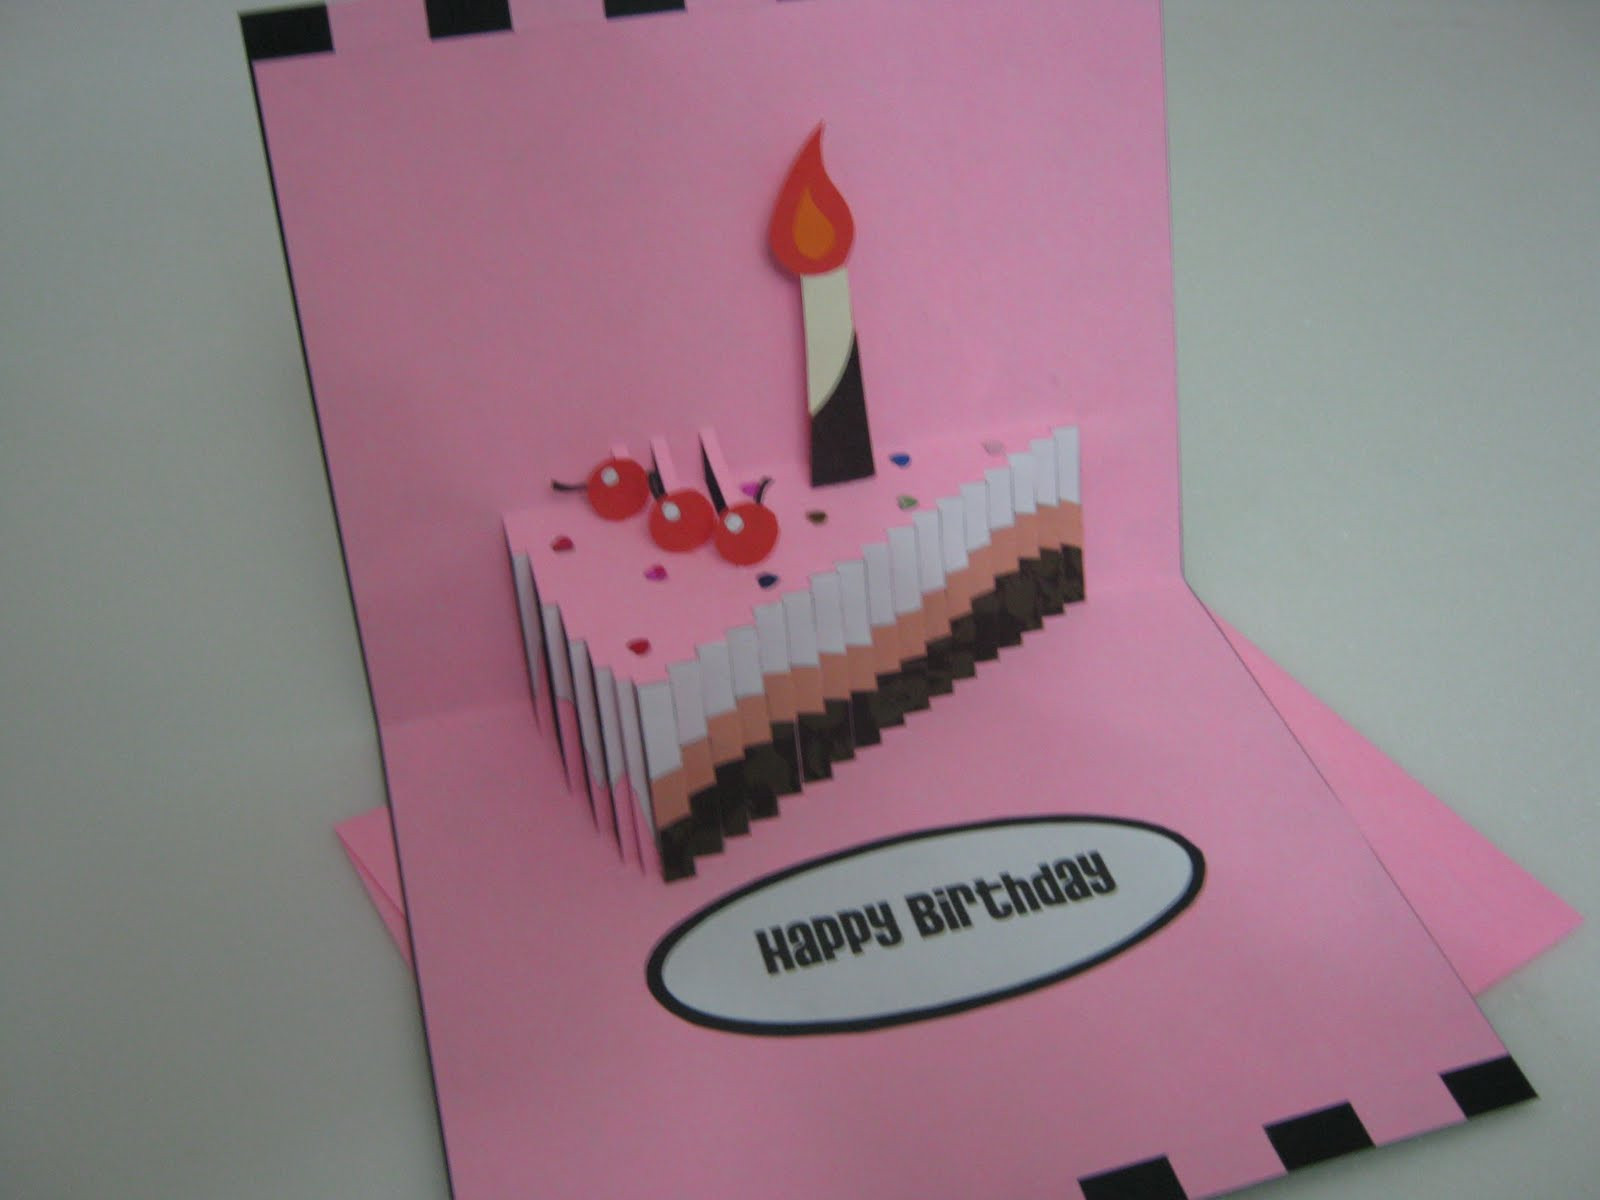 Pop Up Birthday Cards
 Handmade Greeting Card Crafts Bestfriends Made it happy